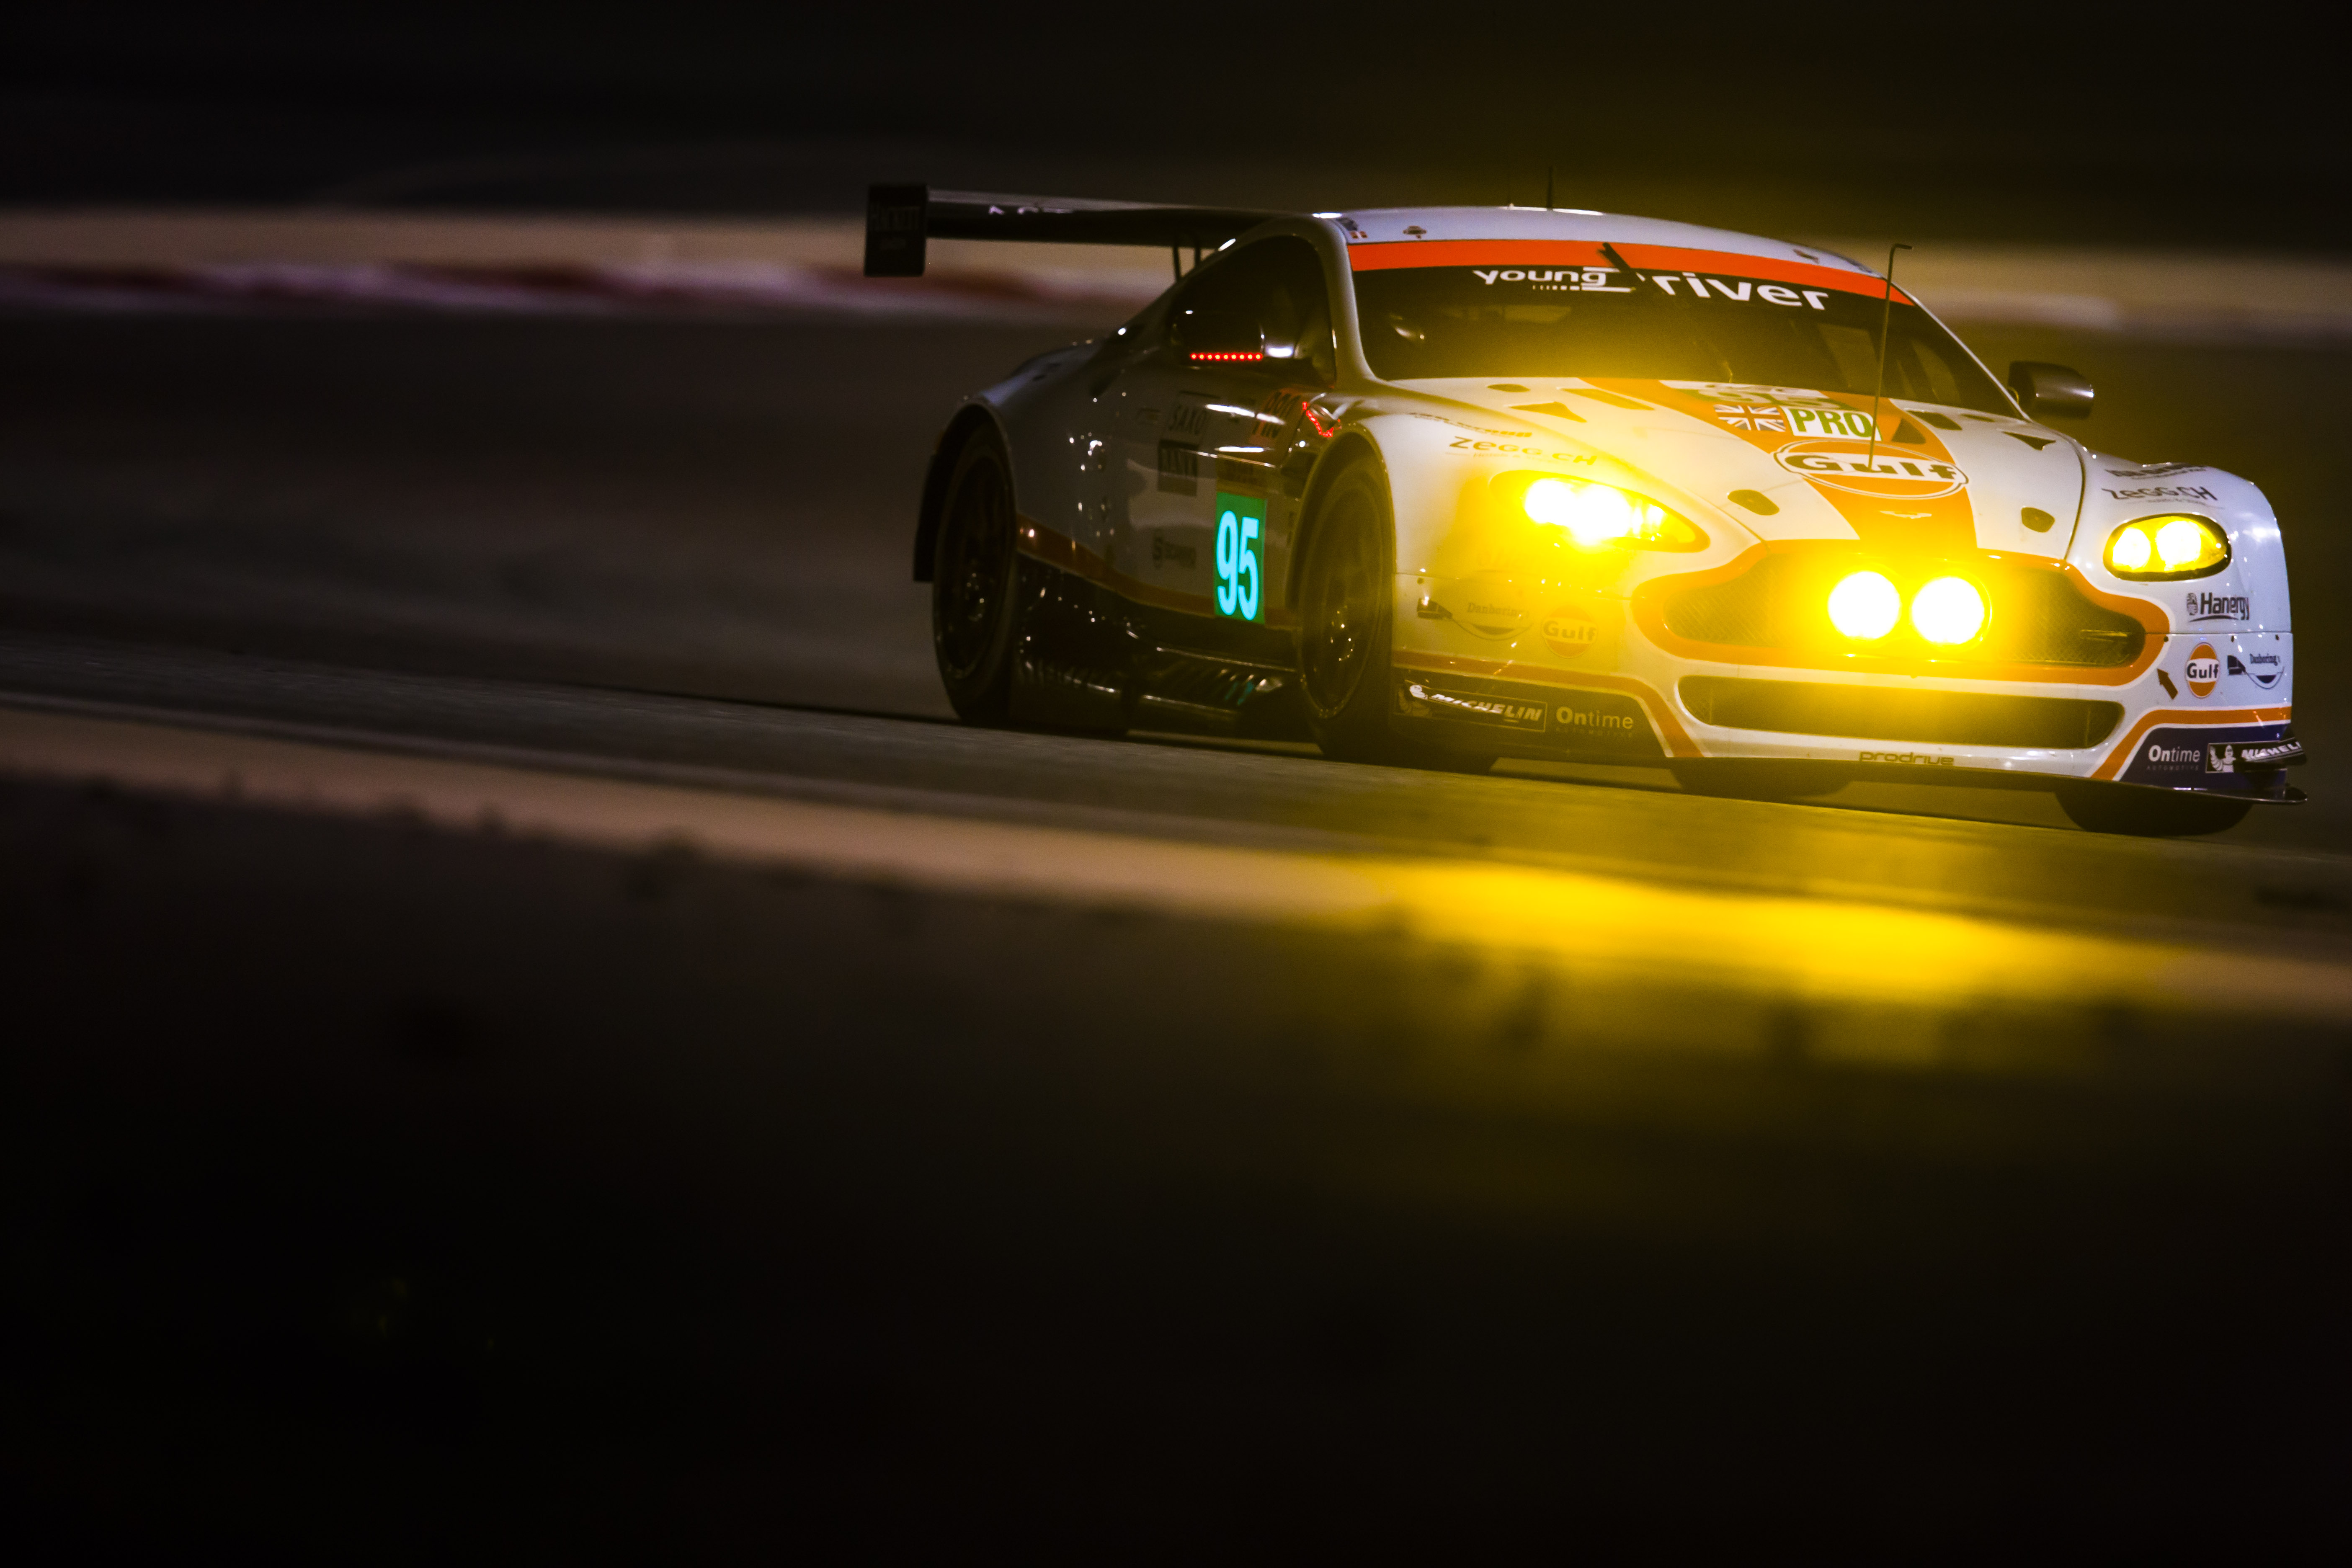 Aston Martin qualifies strongly for Six Hours of Bahrain